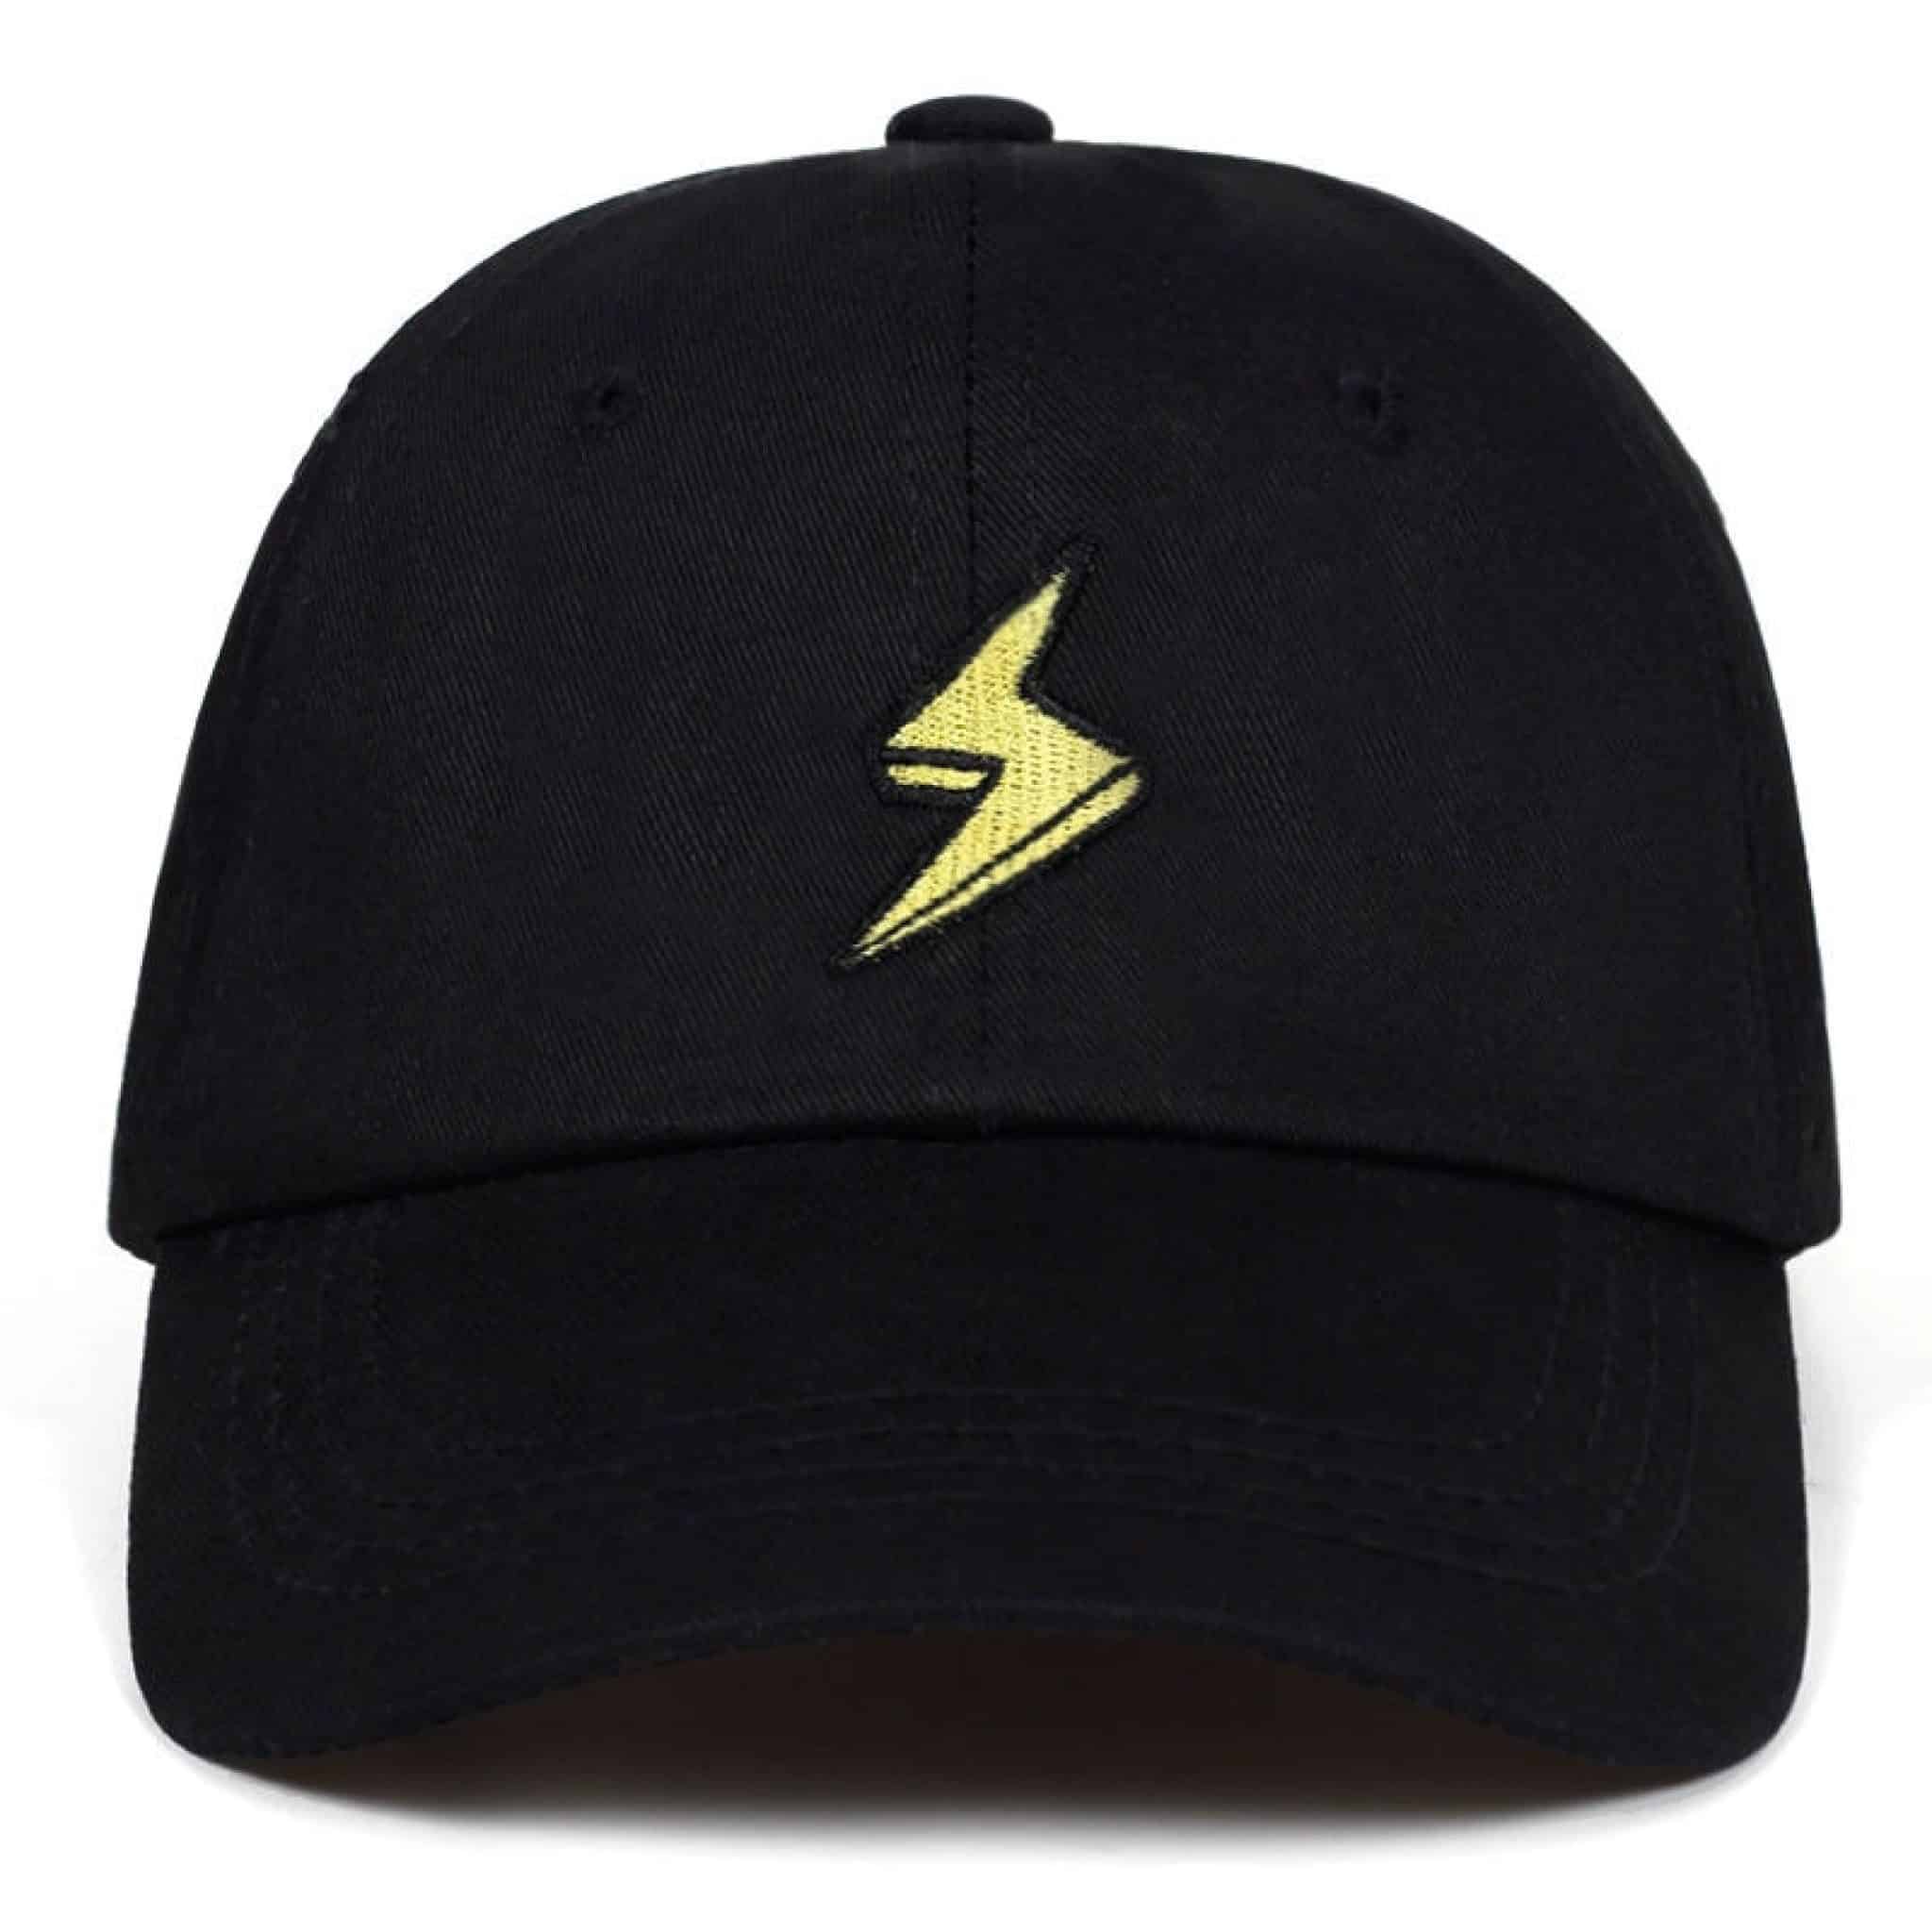 Lightning Bolt Hat | Cool Hats For Men and Women | Cheap Dad Hats